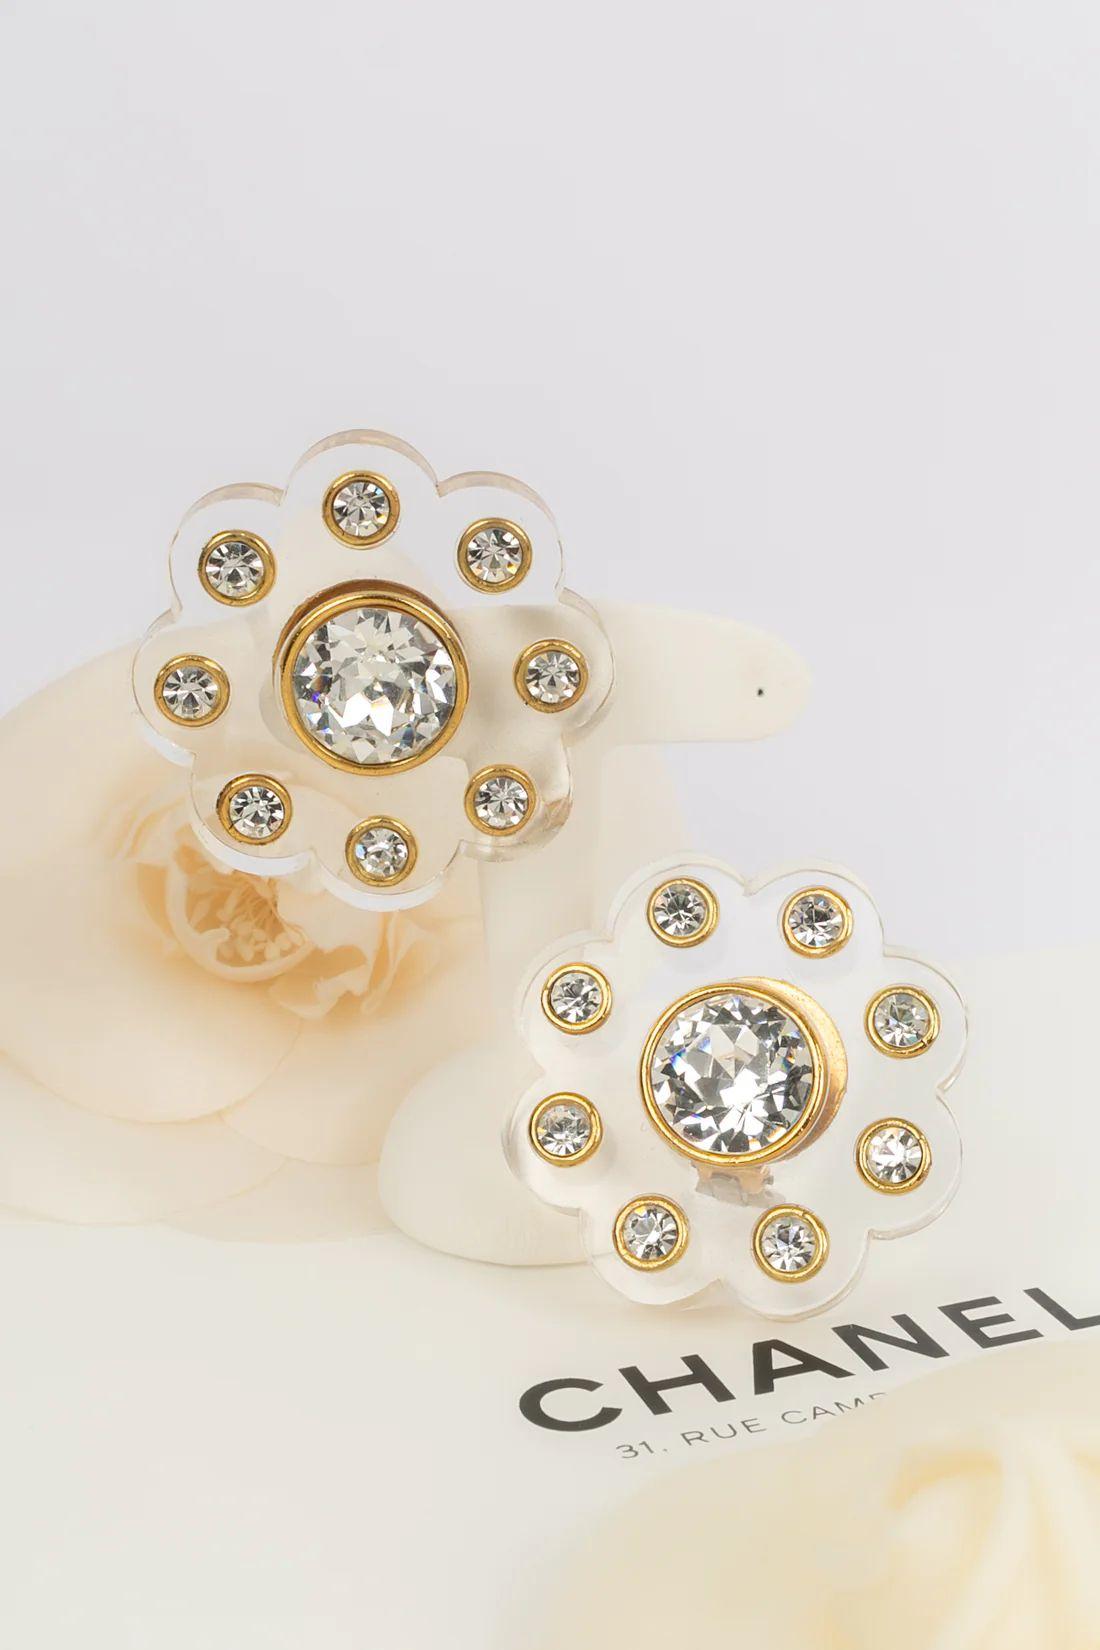 Chanel - (Made in France) Earrings in lucite and strass. Collection 2cc8.

Additional information:
Dimensions: Ø 5 cm

Condition: Very good condition

Seller Ref number: BOB24